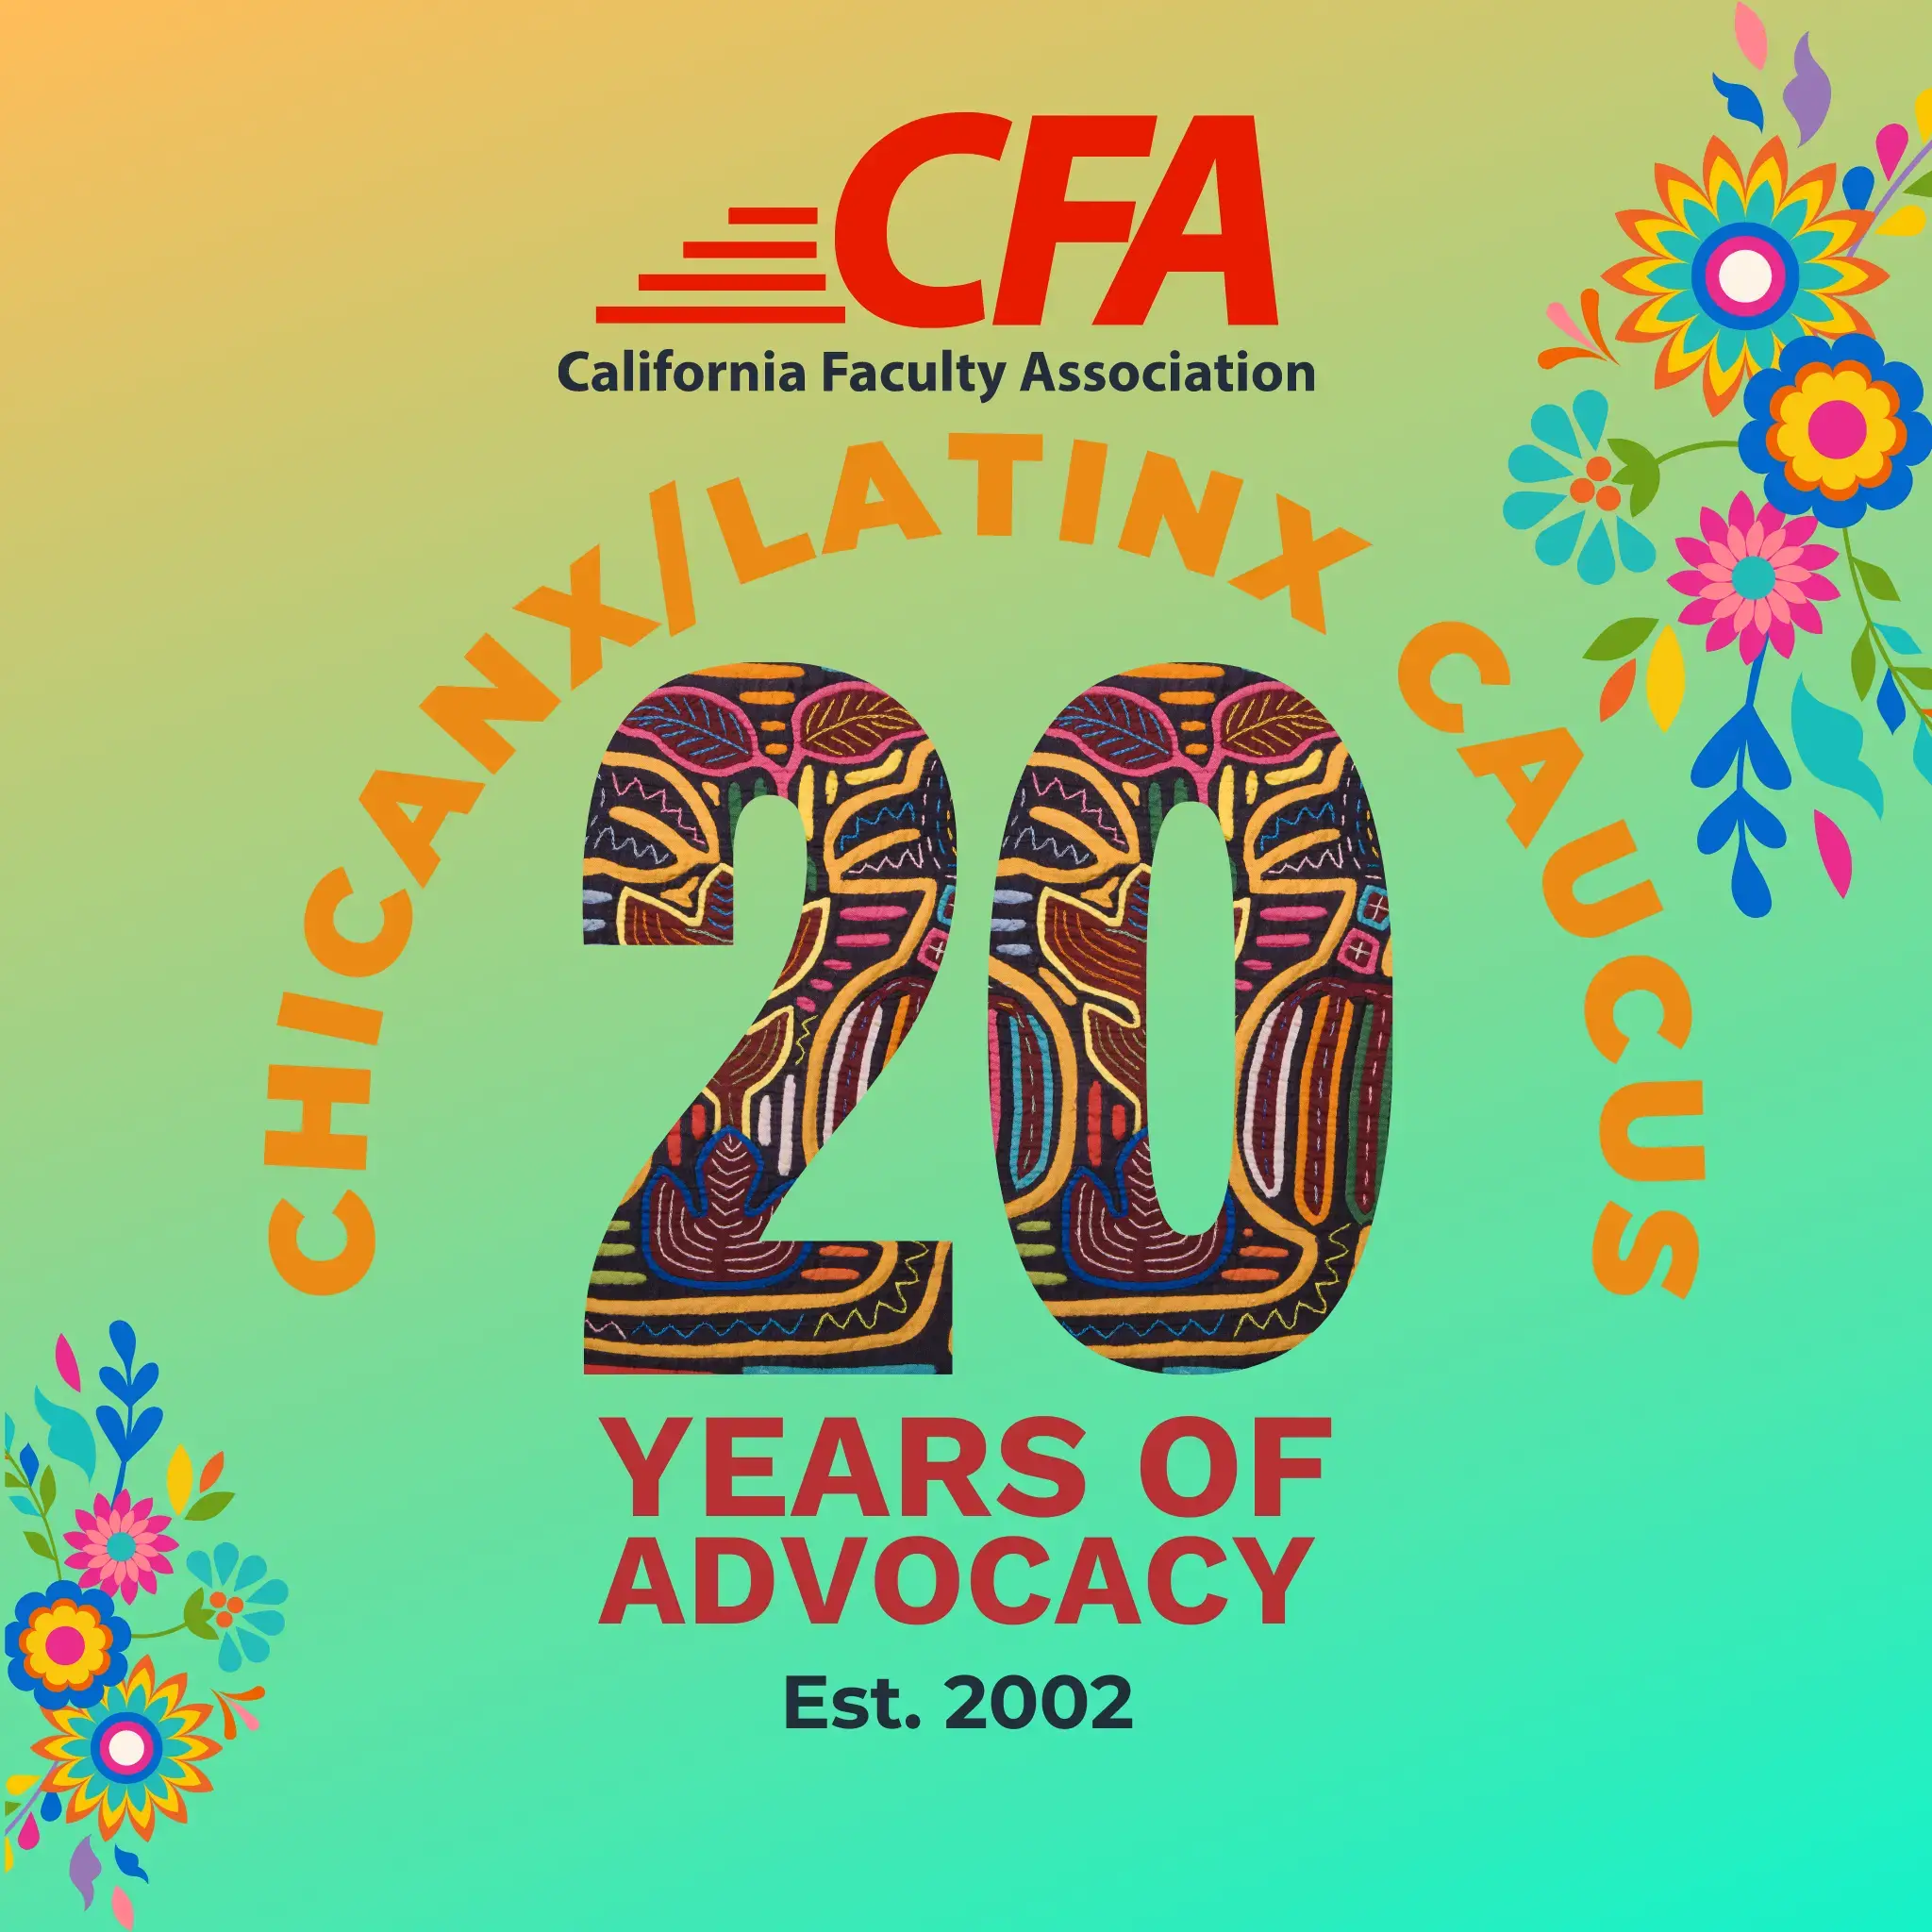 Image with colorful background and text saying 20 years of advocacy